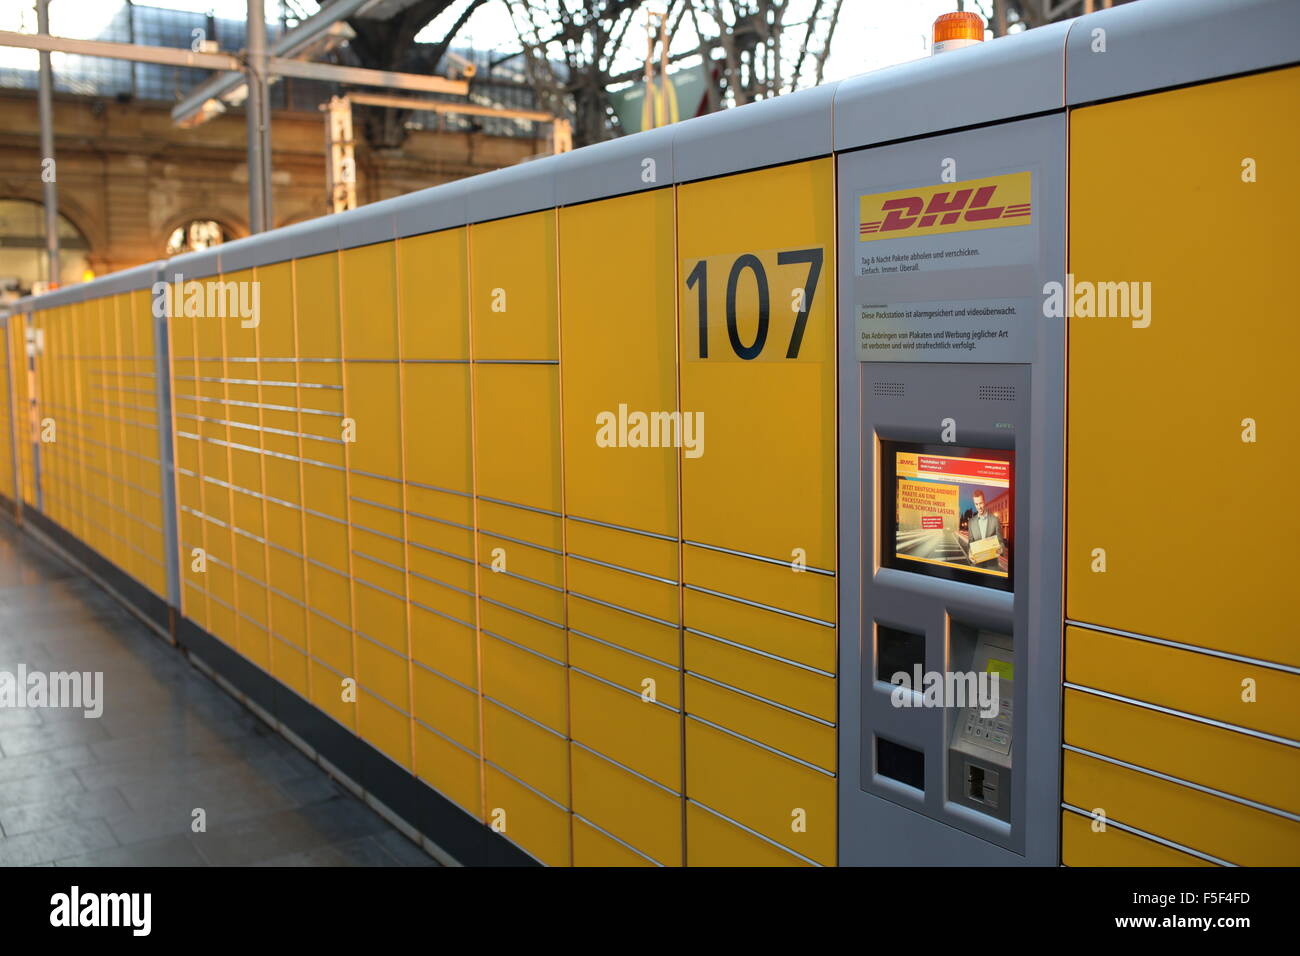 DHL Packet Station in Germany Stock Photo - Alamy